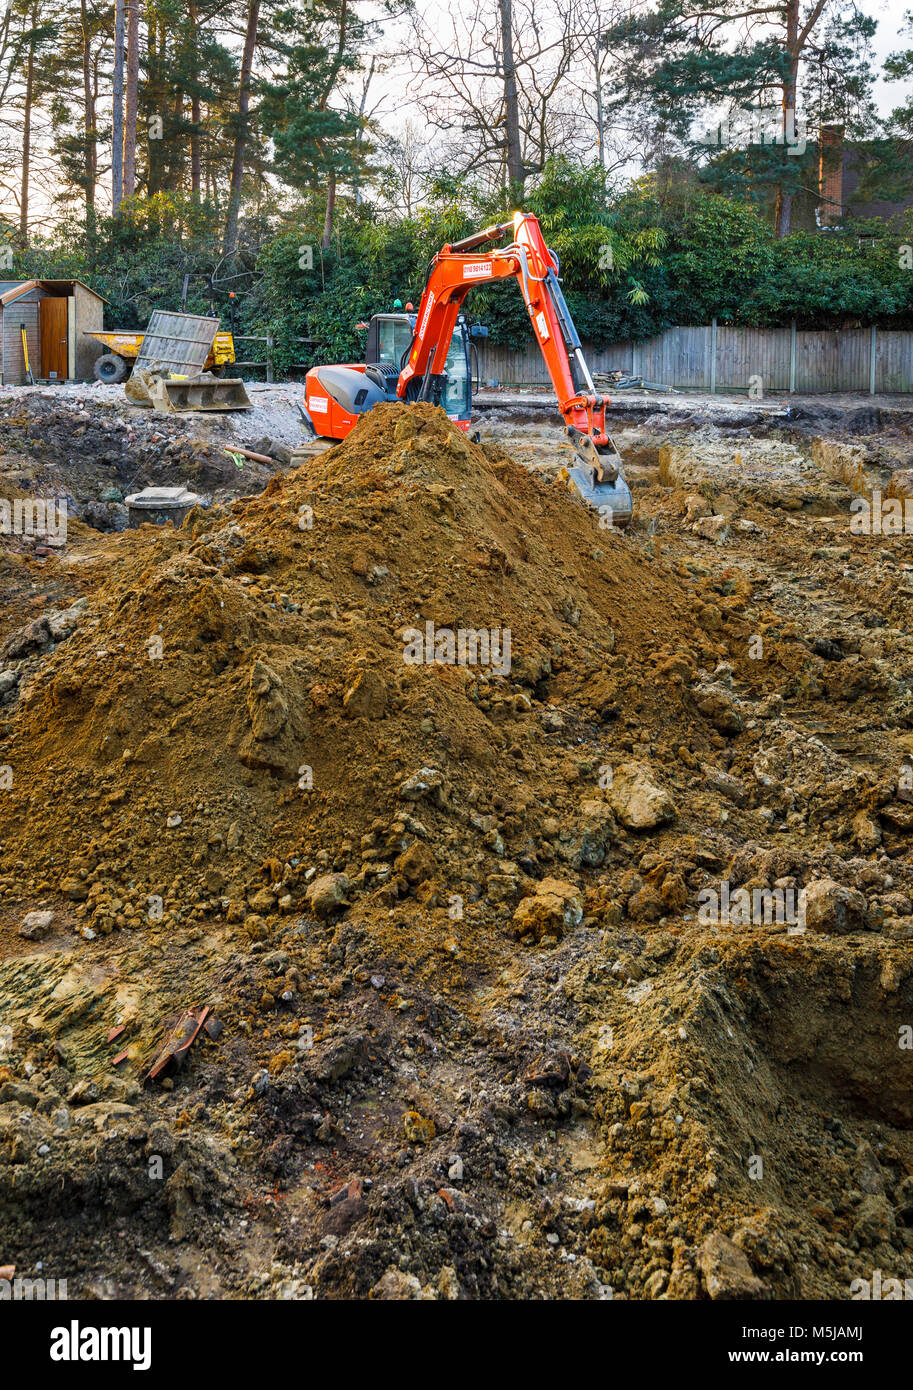 Large orange heavy plant mechanical digger parked on a construction site after digging excavations for foundations of a new residential development Stock Photo